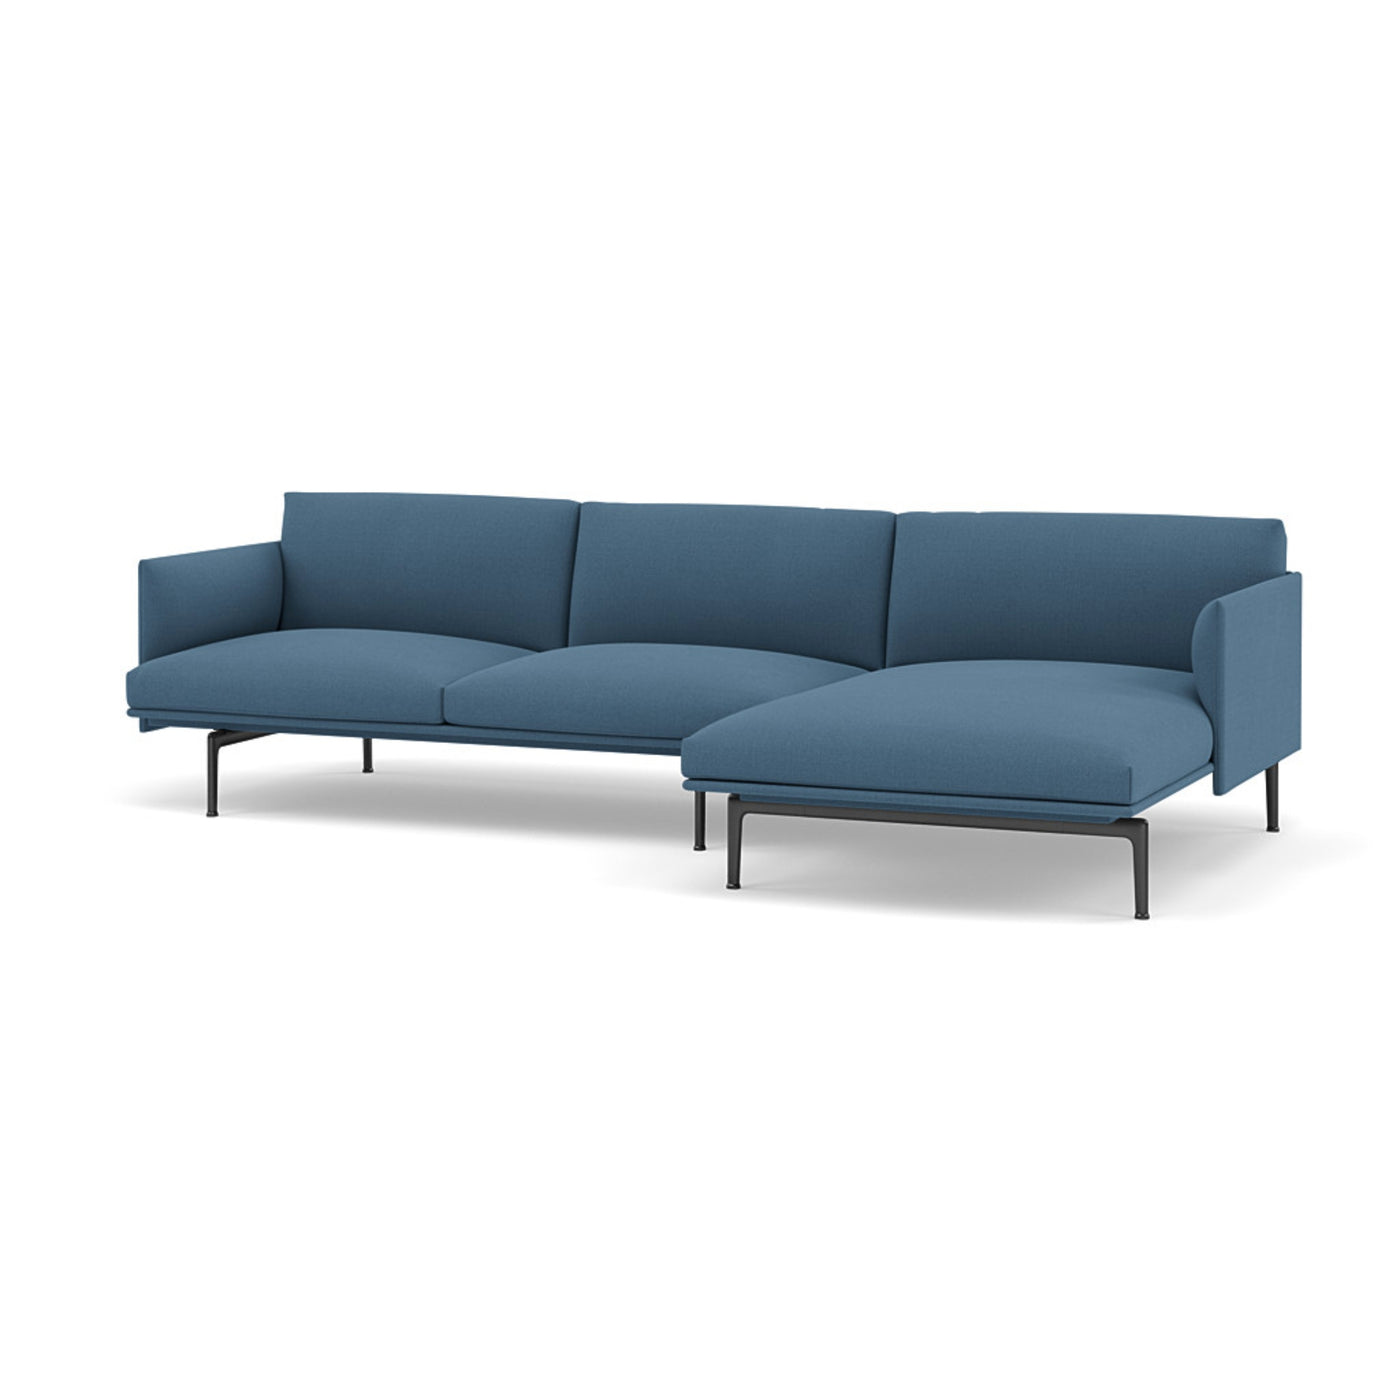 Muuto Outline Chaise Longue sofa. Made to order from someday designs. #colour_vidar-733